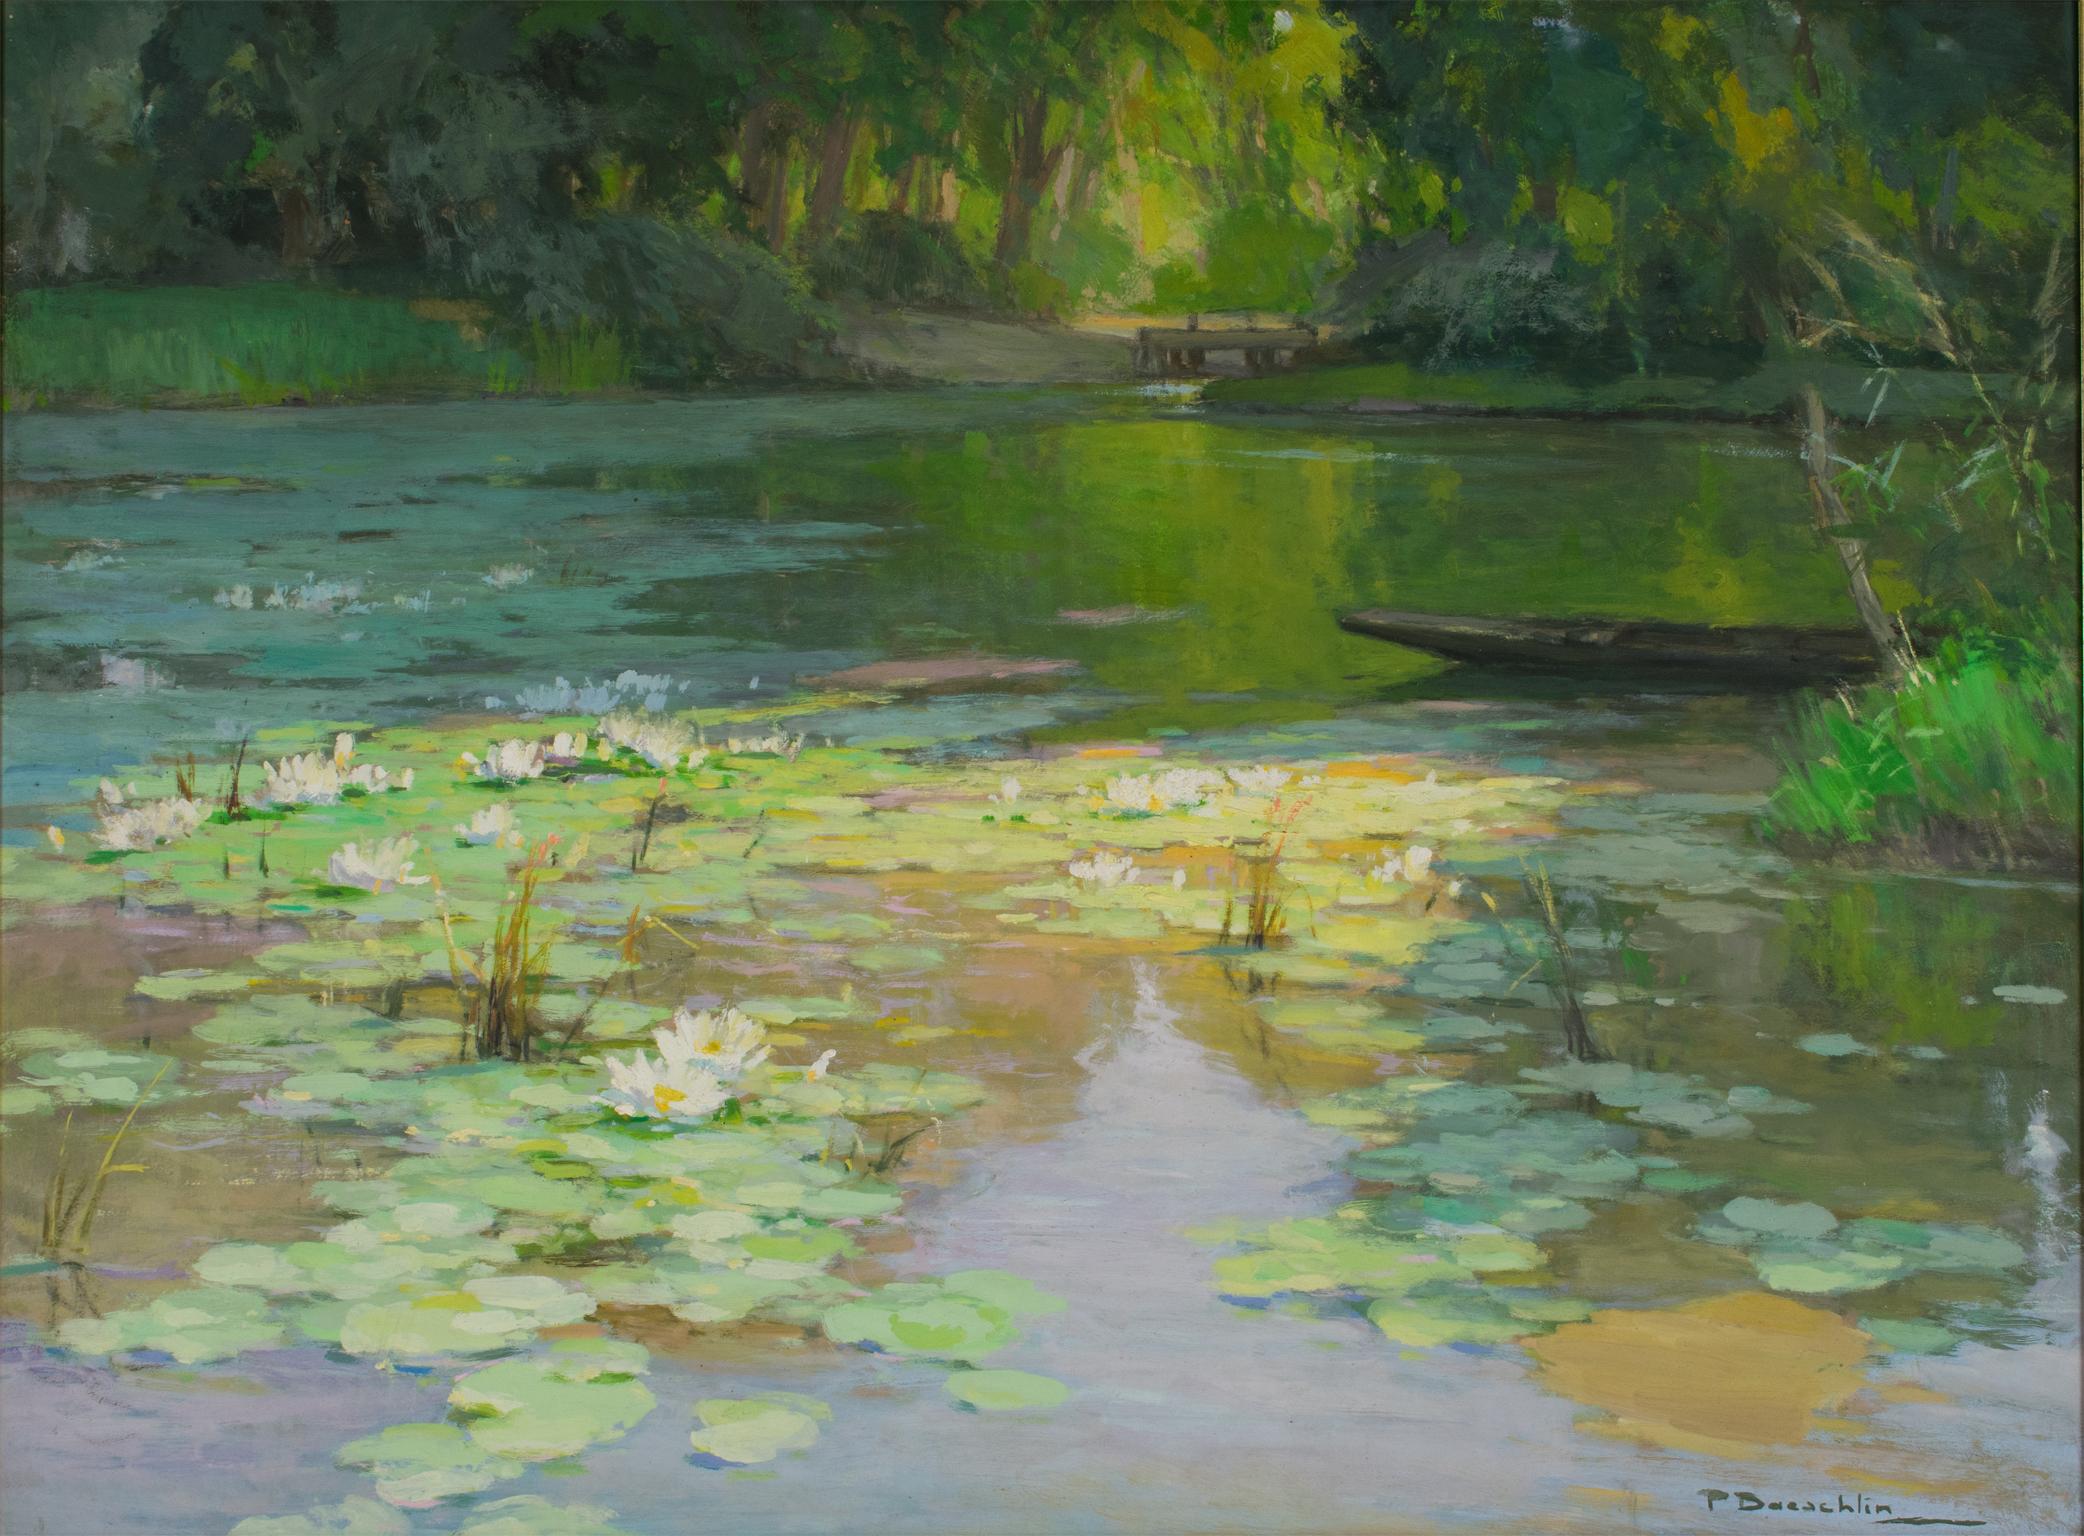 The Water Lilies, Oil on Masonite Board Painting by Pierre Laurent Baeschlin 4